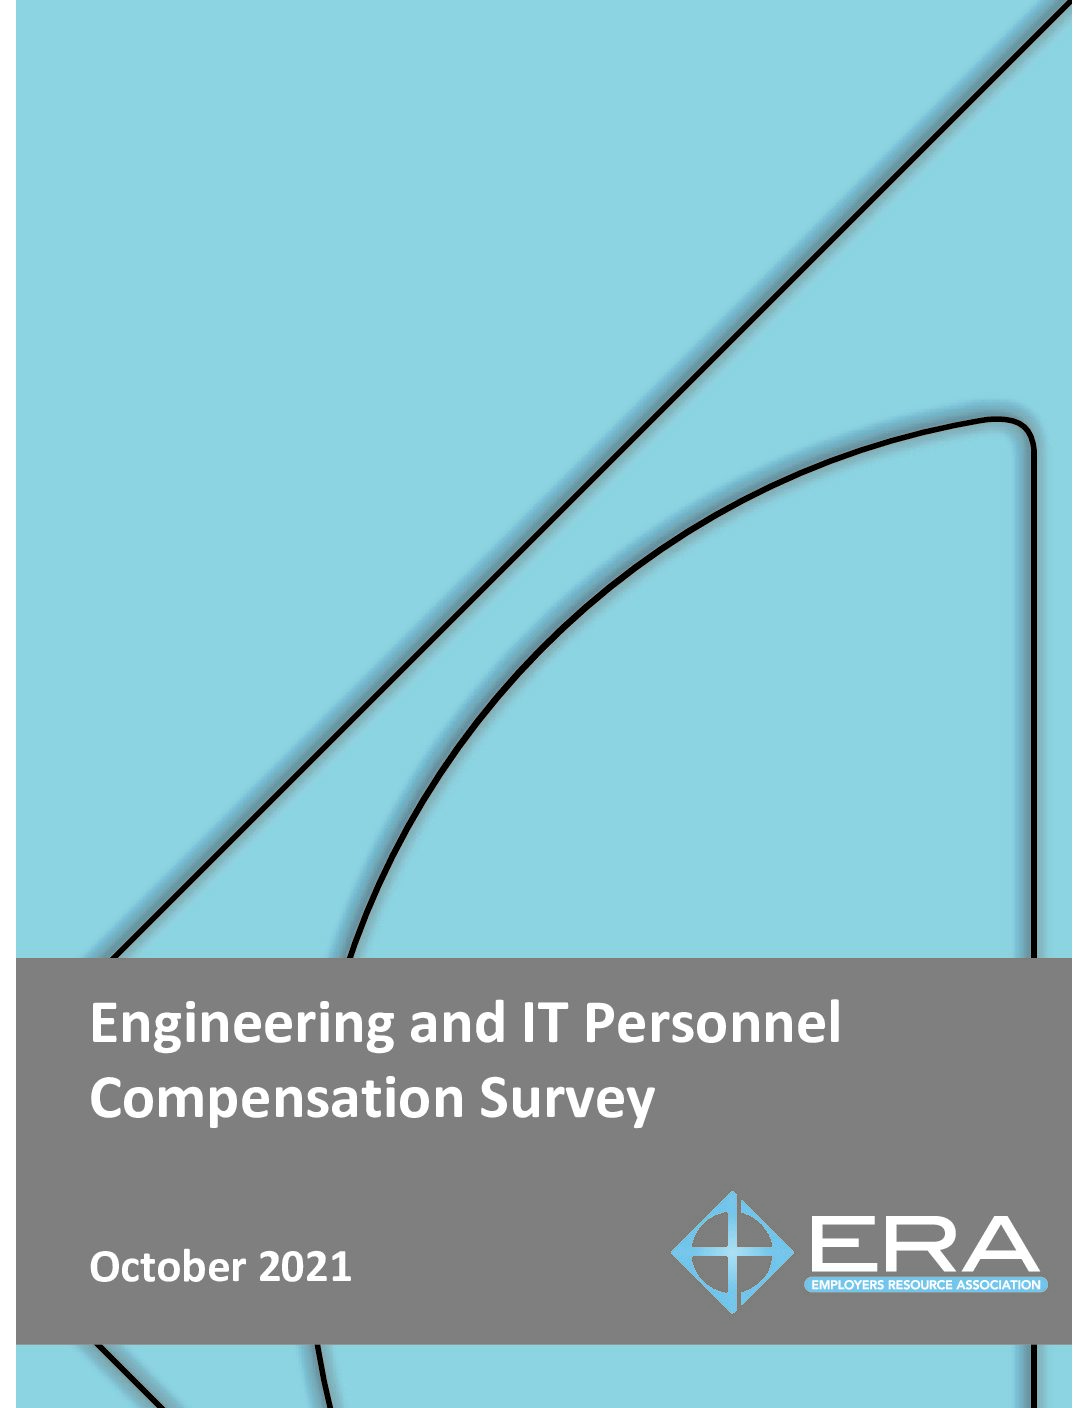 2021 Engineering and IT Personnel Compensation Survey